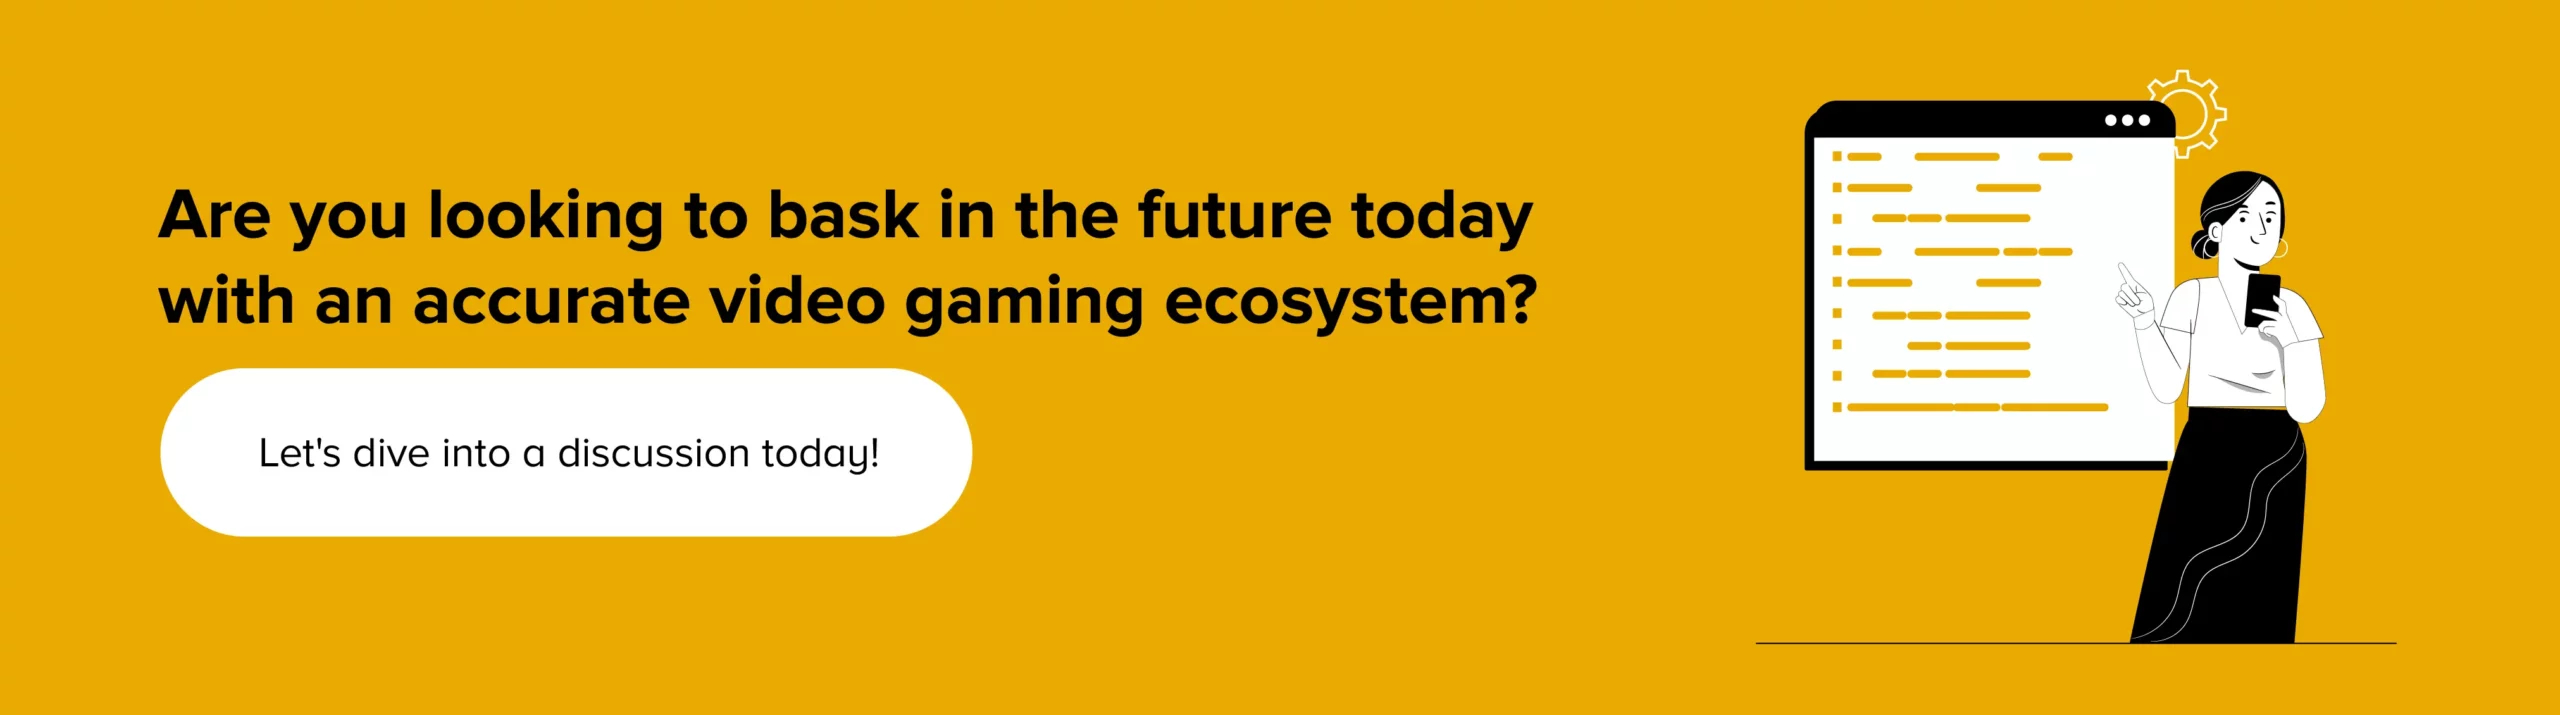 To develop an accurate video gaming ecosystem with us 